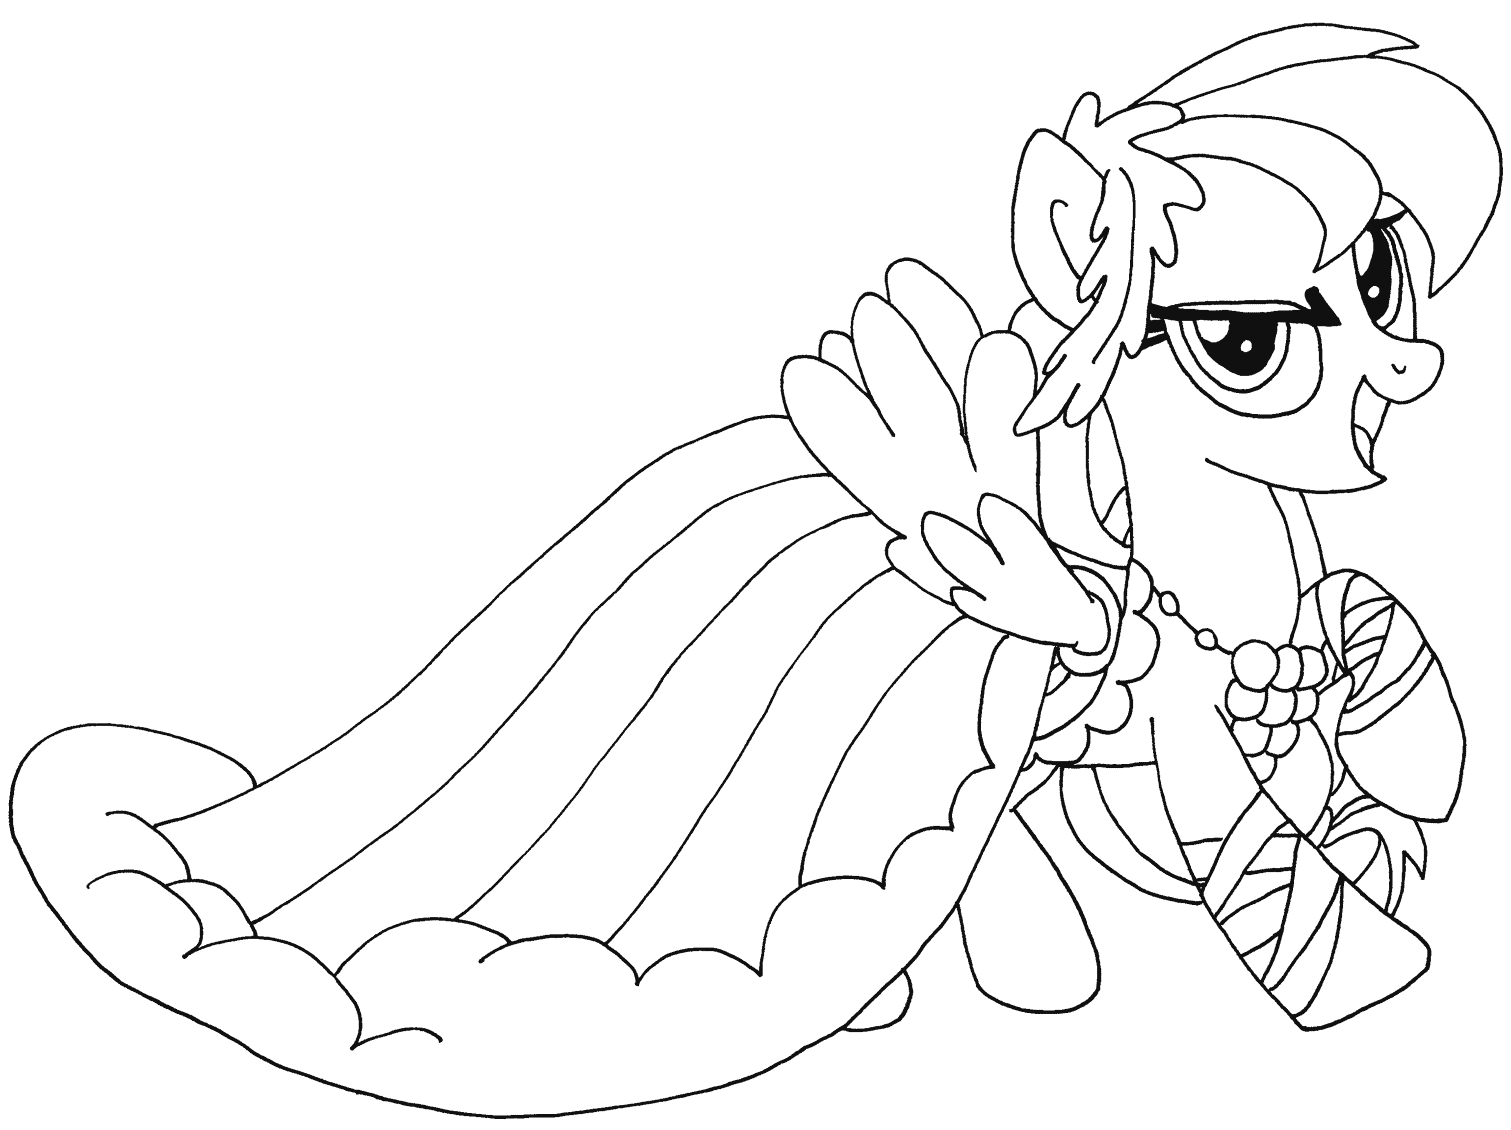 Cute Rainbow Dash My Little Pony Coloring Pages   Coloring Cool